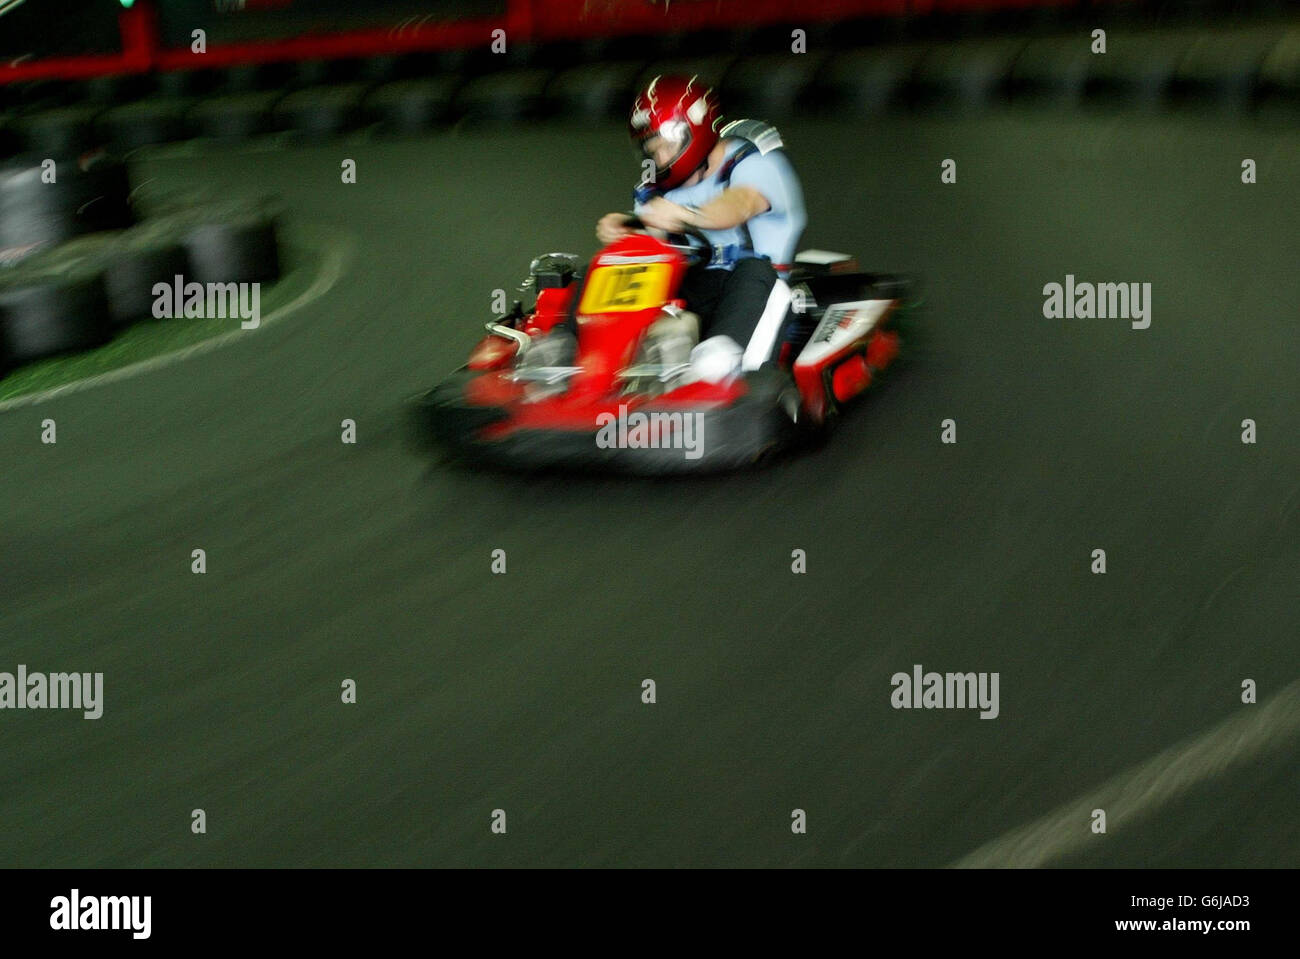 Ireland's Marcus Horan enjoys some indoor karting, on a day-off in Melbourne ahead of this weekend's Rugby World Cup Quarter Final clash with France. NO MOBILE PHONE USE. INTERNET SITES MAY ONLY USE ONE IMAGE EVERY FIVE MINUTES DURING THE MATCH. Stock Photo